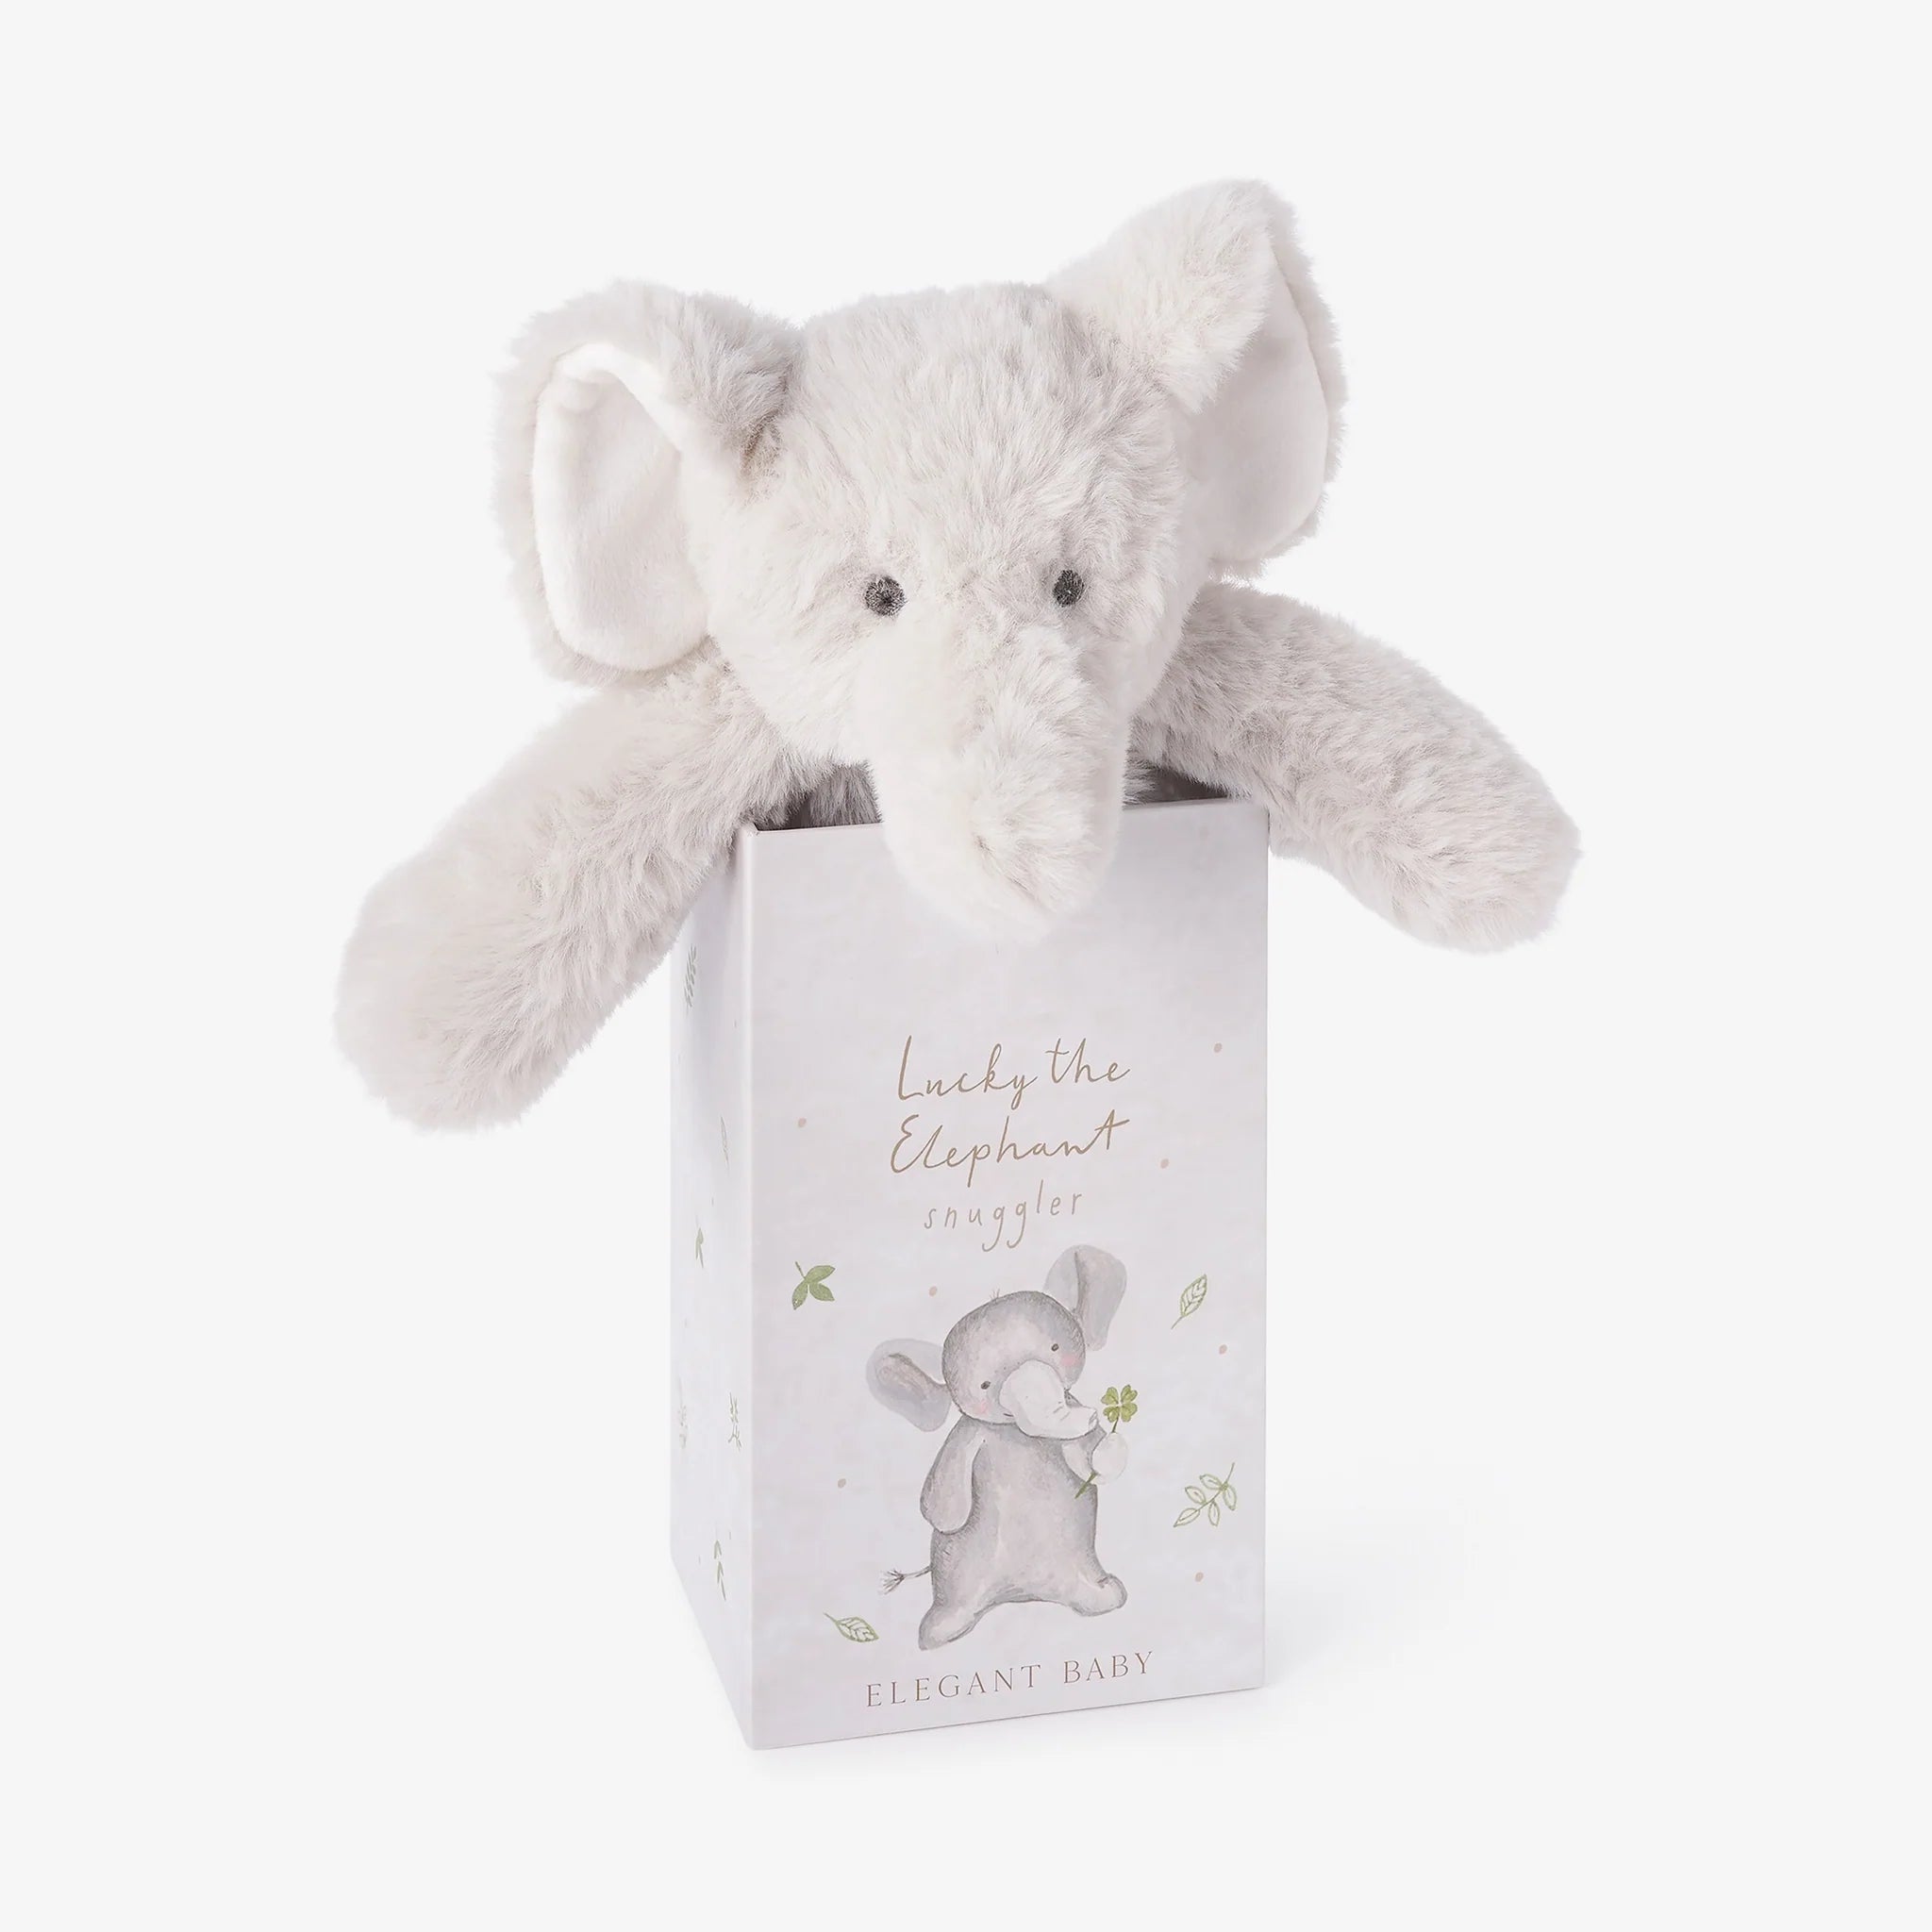 Lucky the Elephant Snuggler Plush Security Blanket w/Gift Box.